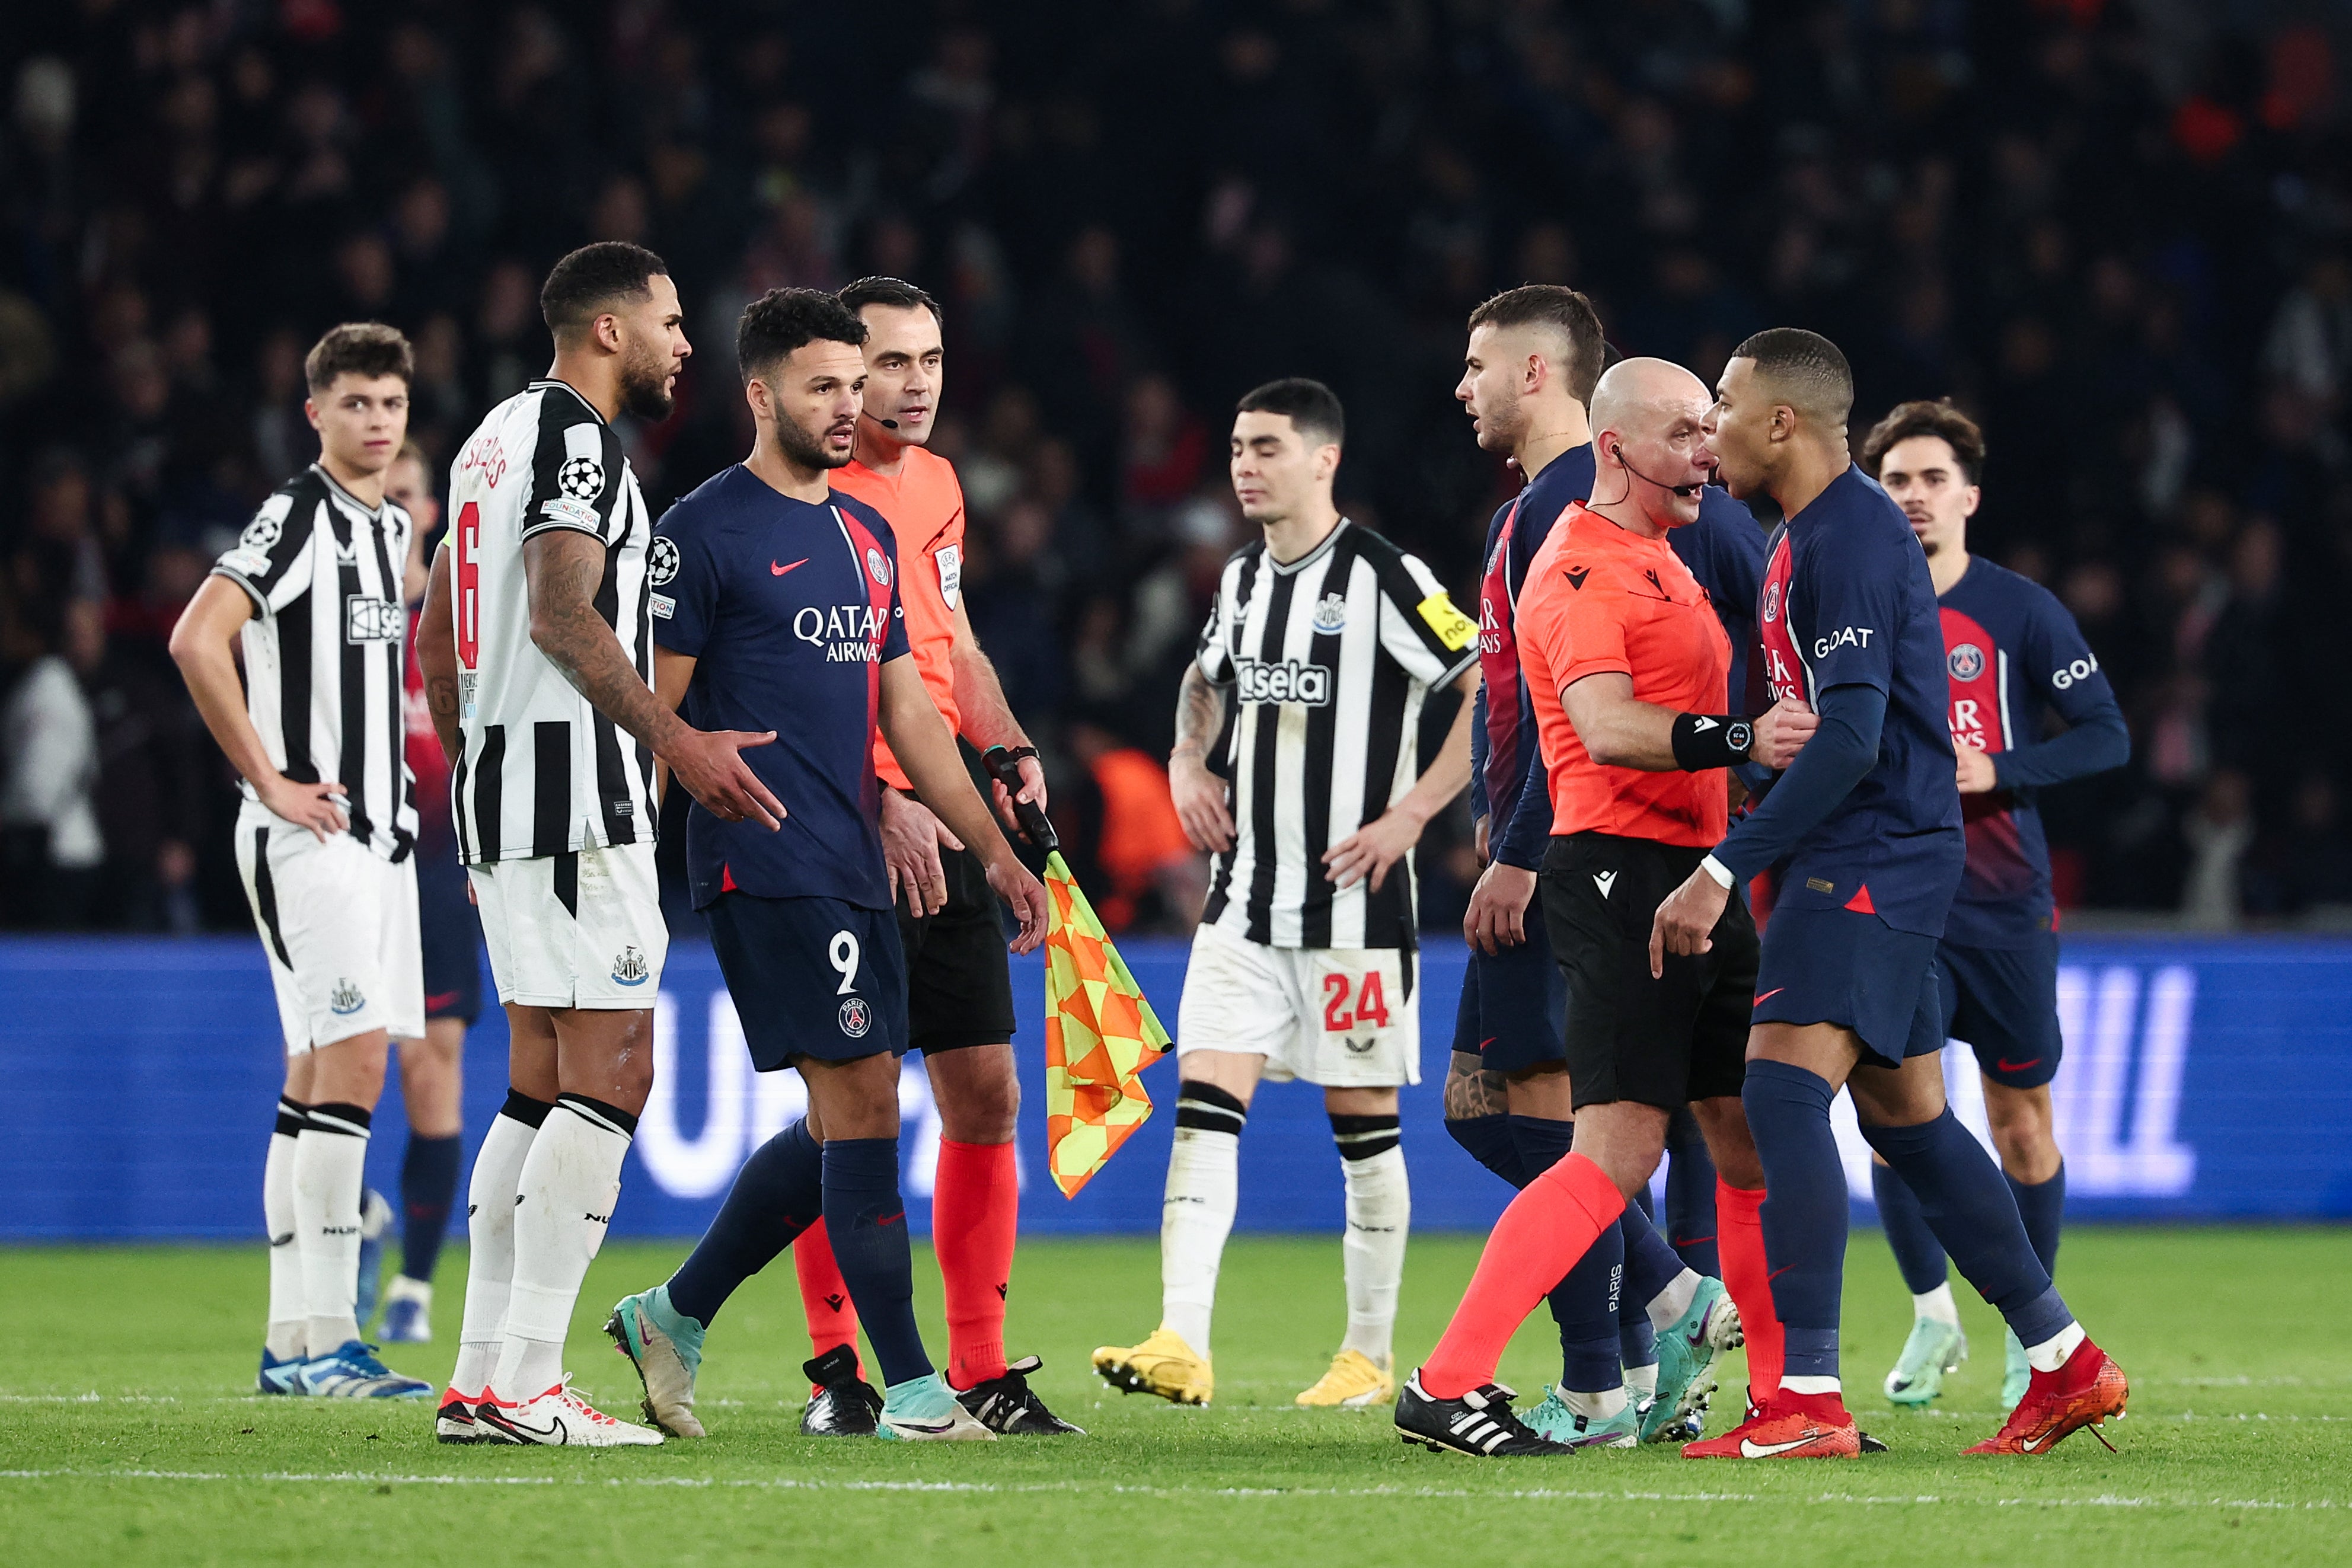 uefa drop var official who gave controversial psg penalty vs newcastle